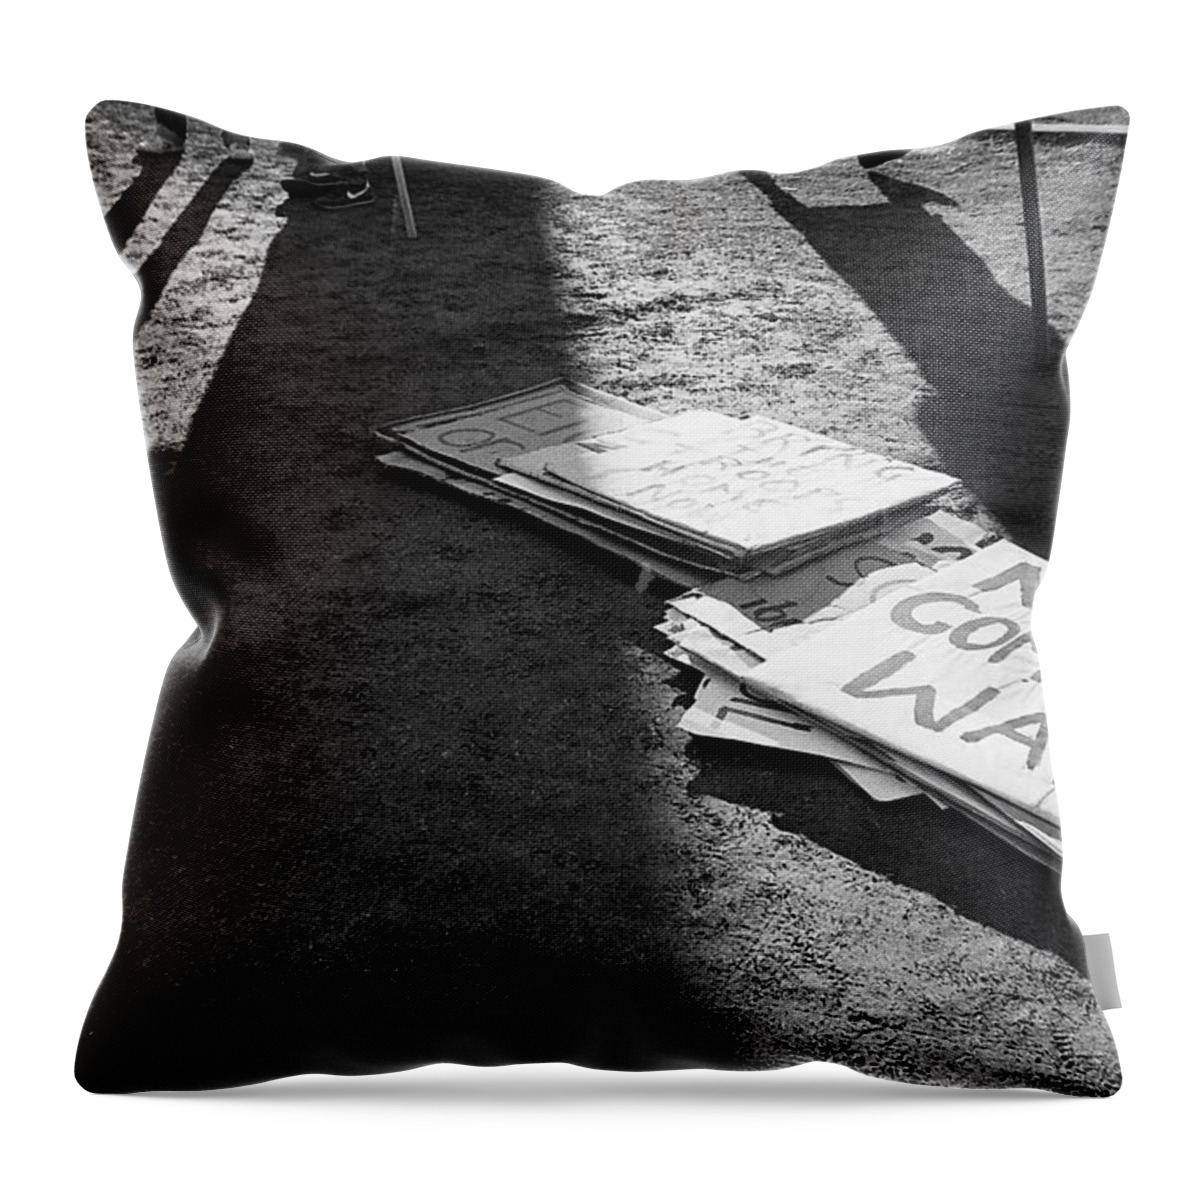 No Oil Company War Sign University Of Arizona Tucson 1991 Throw Pillow featuring the photograph No Oil Company War Sign University Of Arizona Tucson 1991 by David Lee Guss